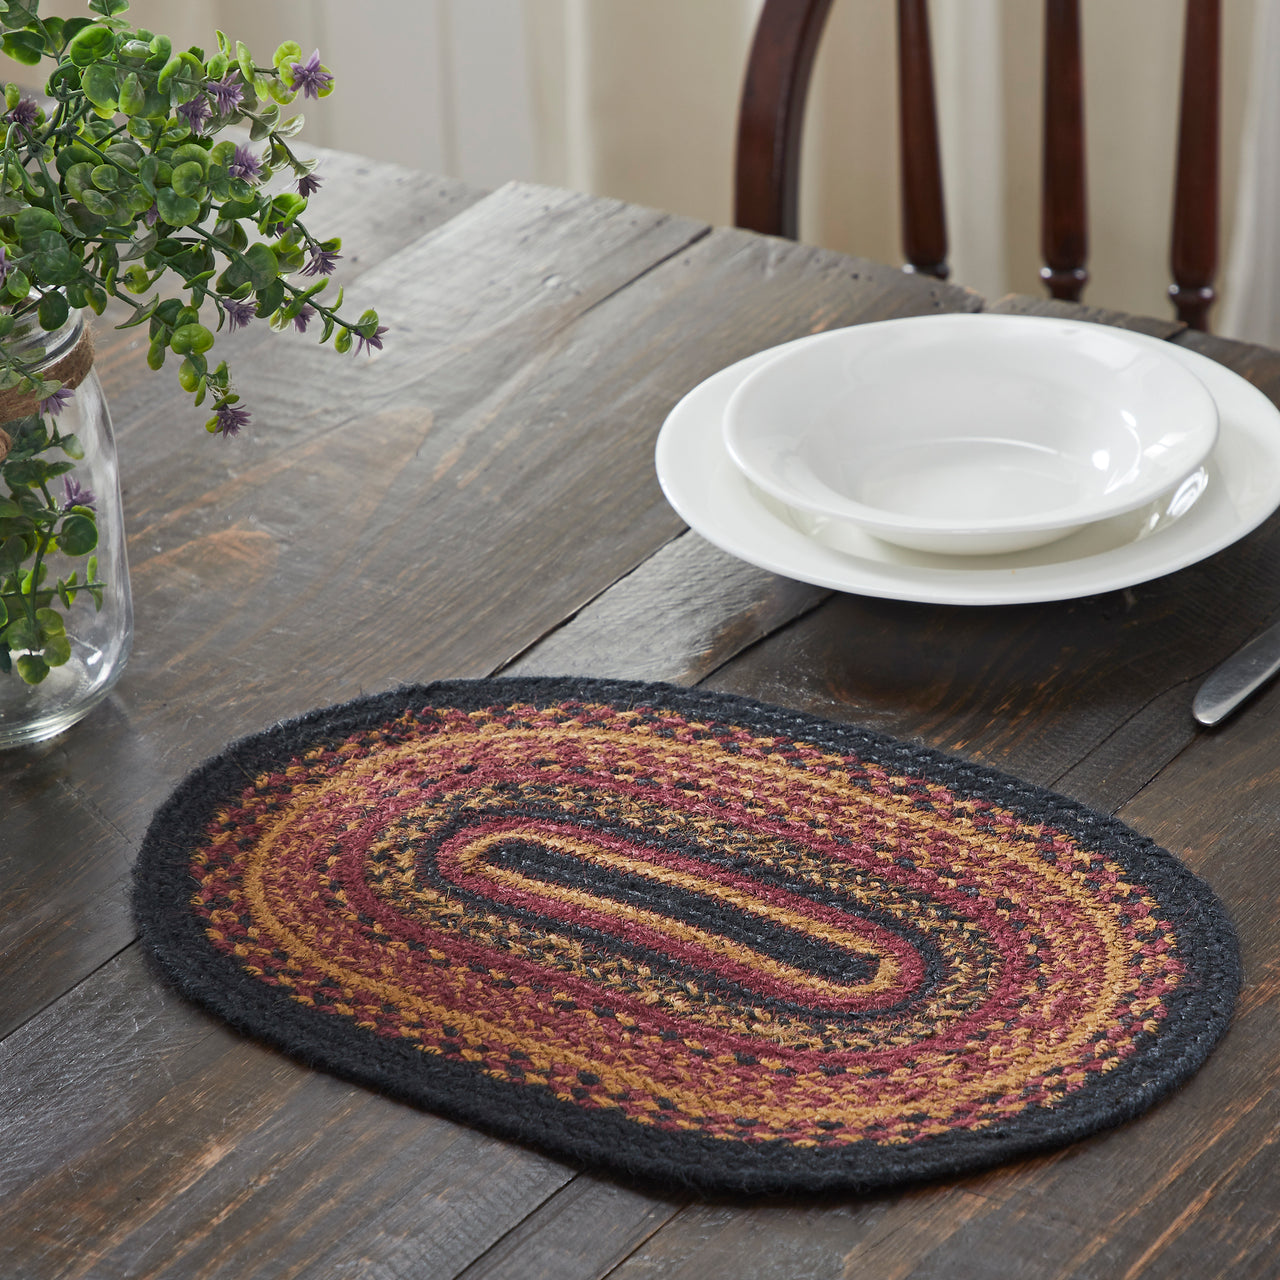 Heritage Farms Jute Oval Placemat 12x18 VHC Brands